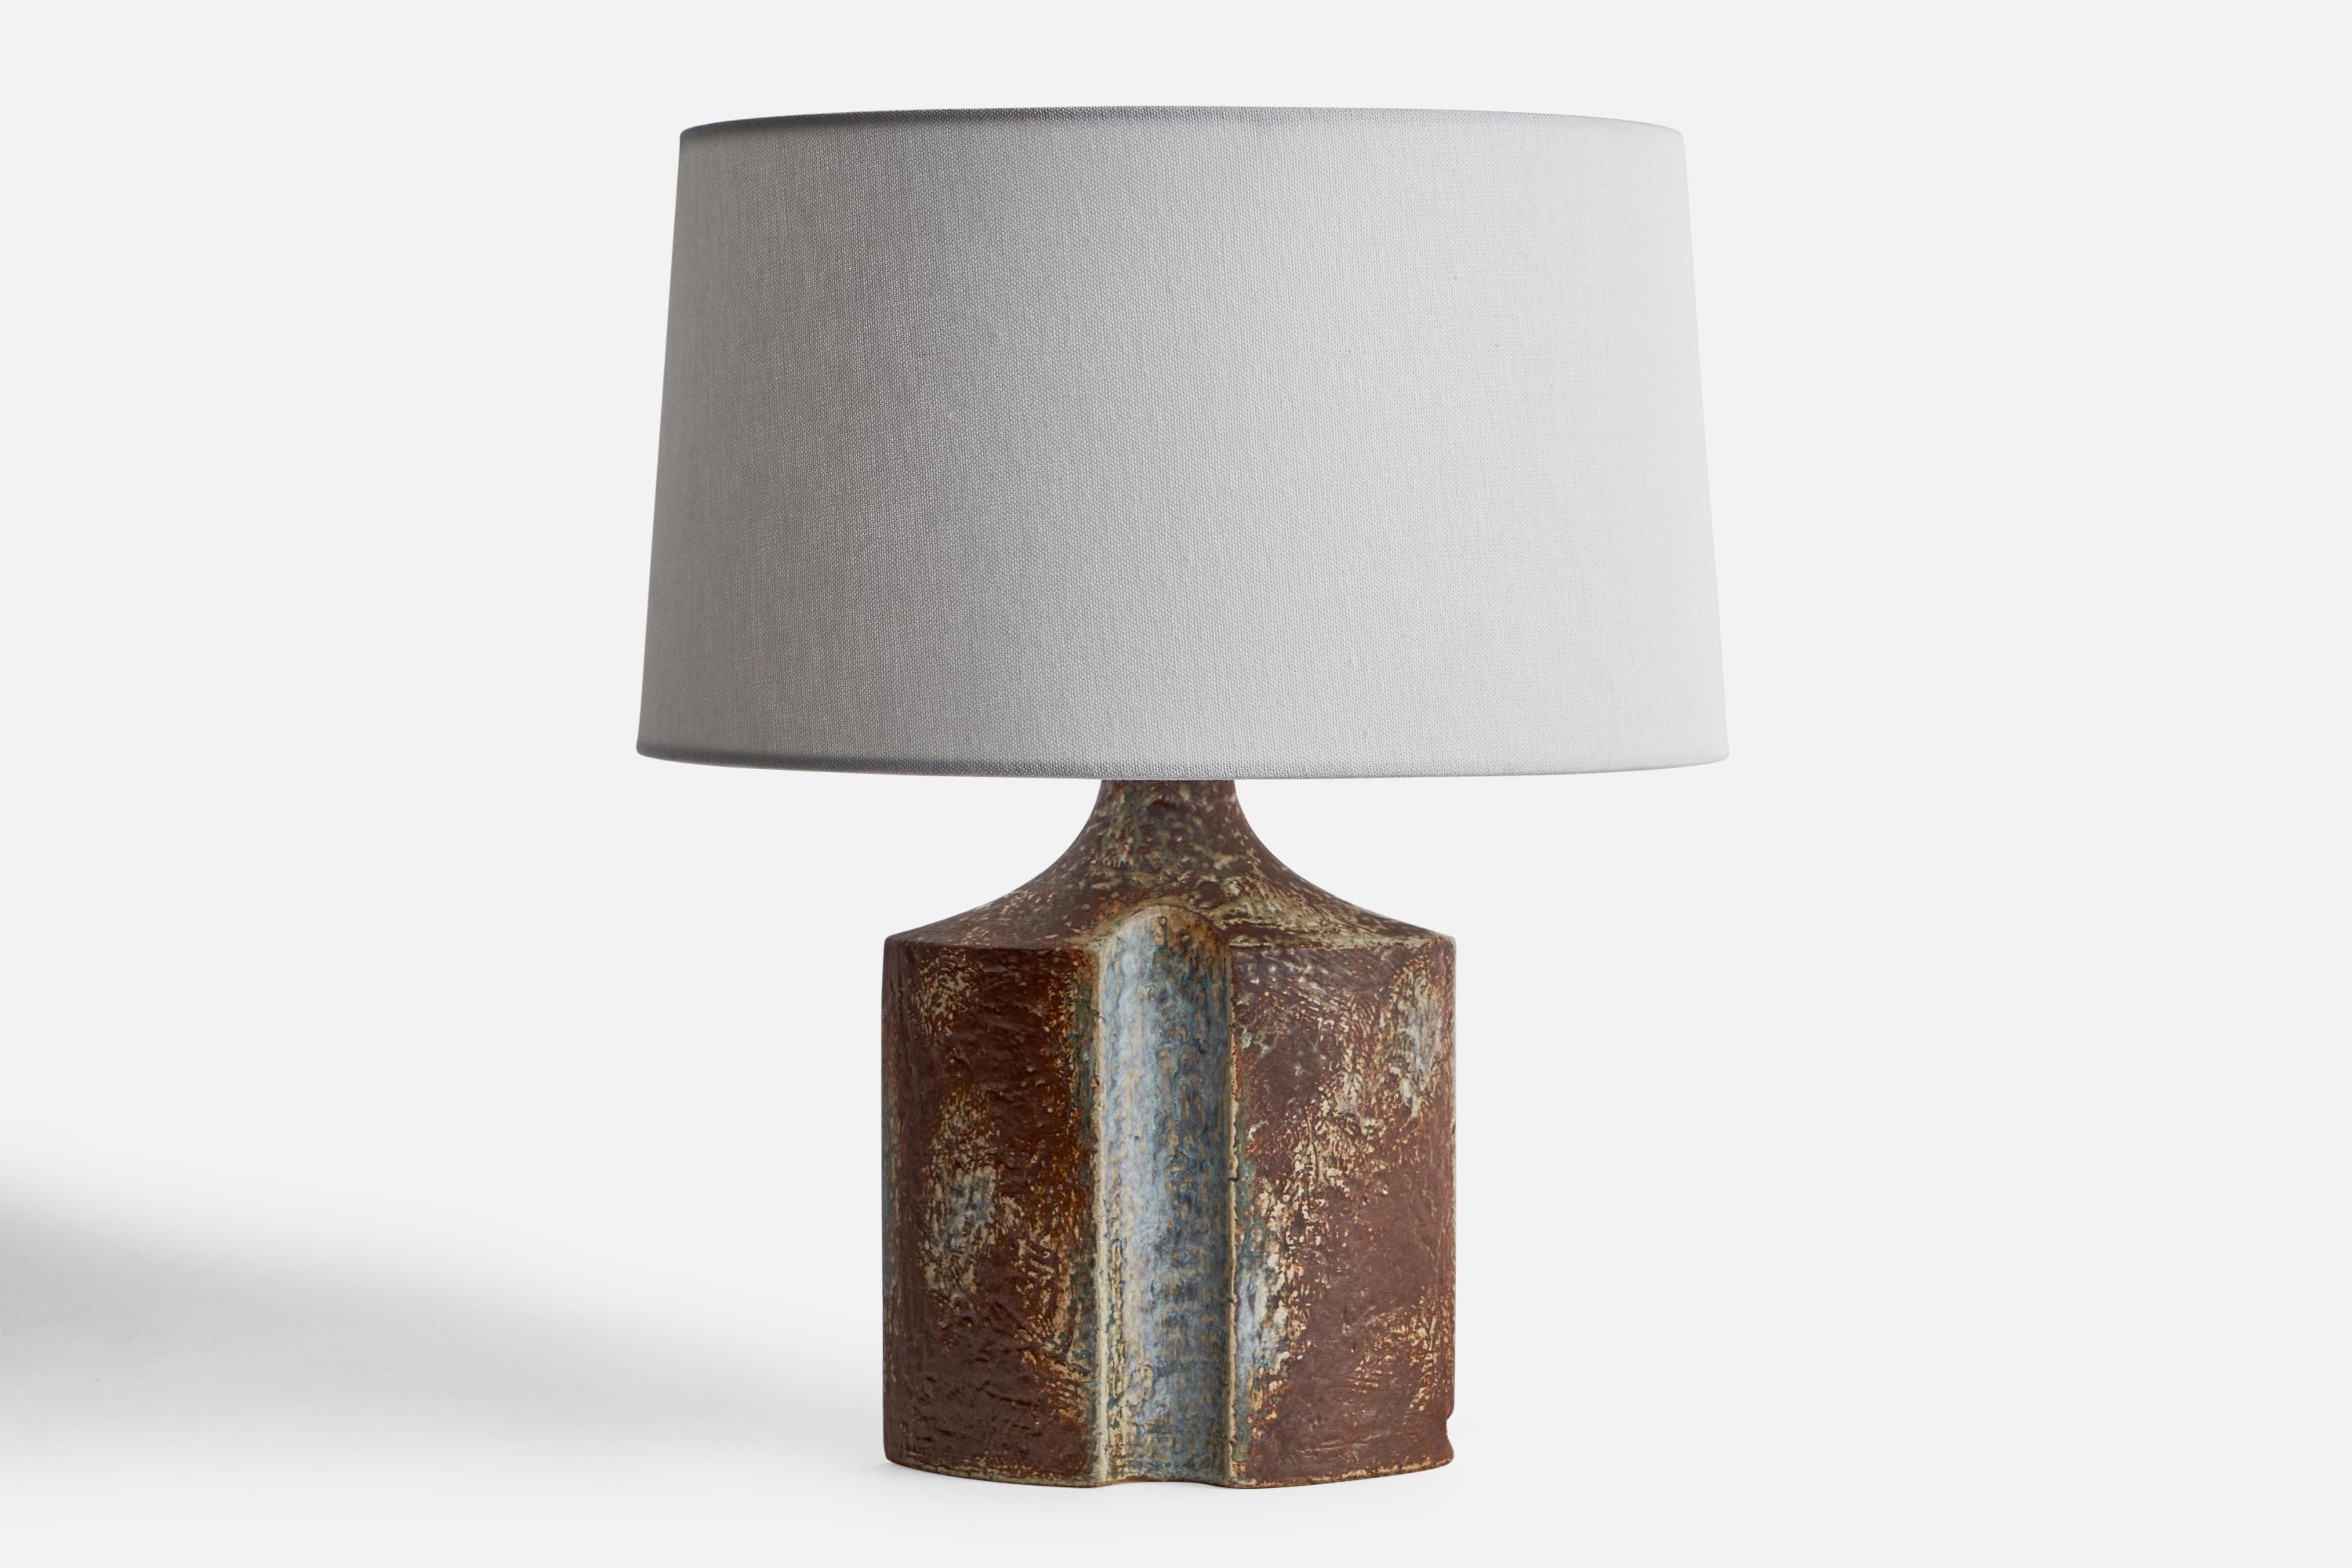 A grey and brown-glazed stoneware table lamp designed by Haico Neitchze and produced by Søholm, Denmark, 1960s.

Dimensions of Lamp (inches): 10.8” H x 6.45” W x 3.45” D
Dimensions of Shade (inches): 4.5” Top Diameter x 10” Bottom Diameter x 5.25”